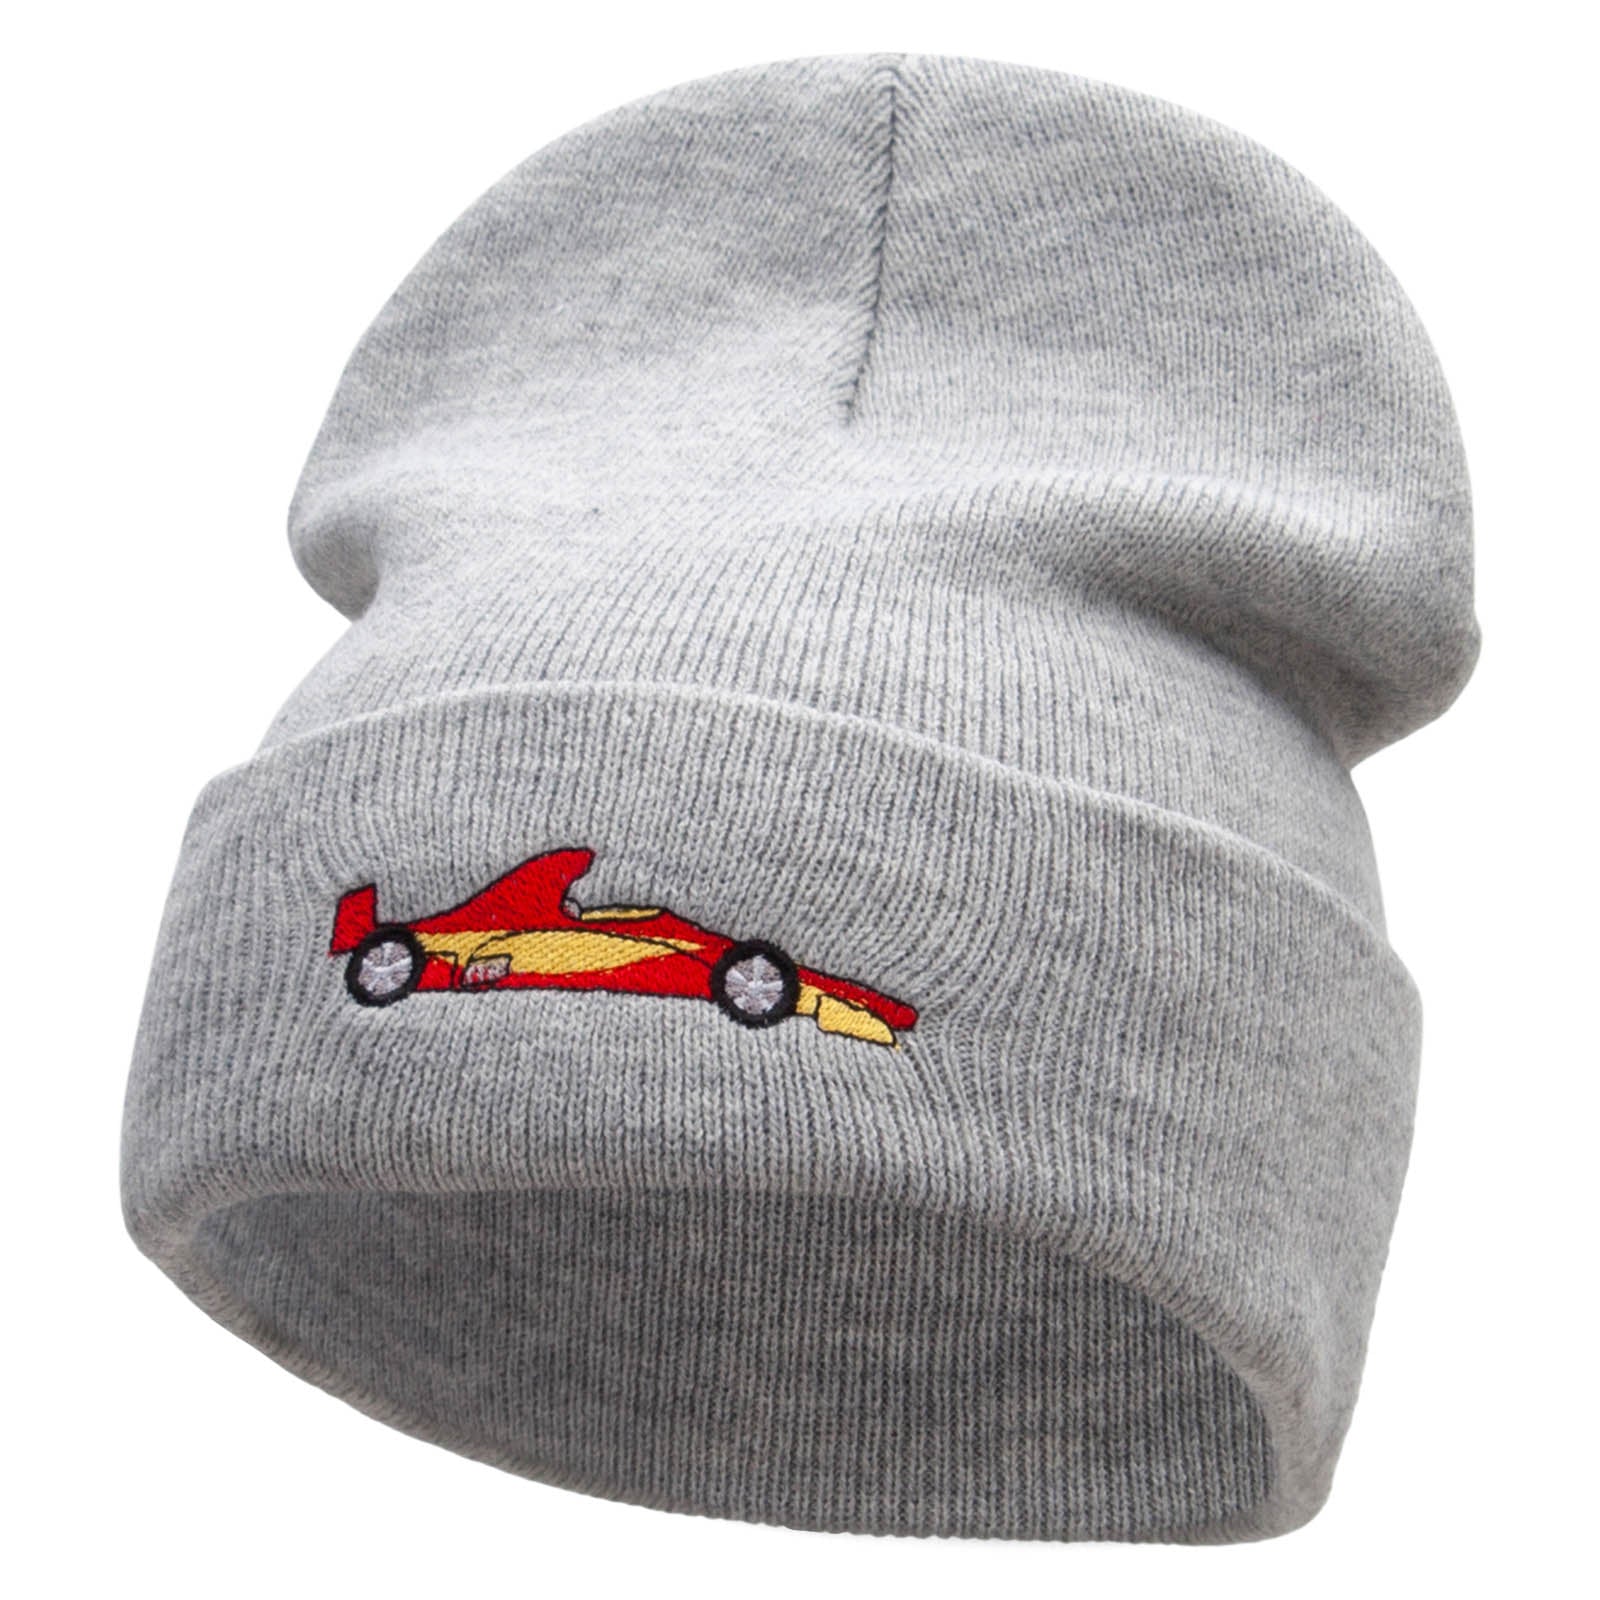 Grand Prix Racer Embroidered 12 Inch Long Knitted Beanie - Heather Grey OSFM